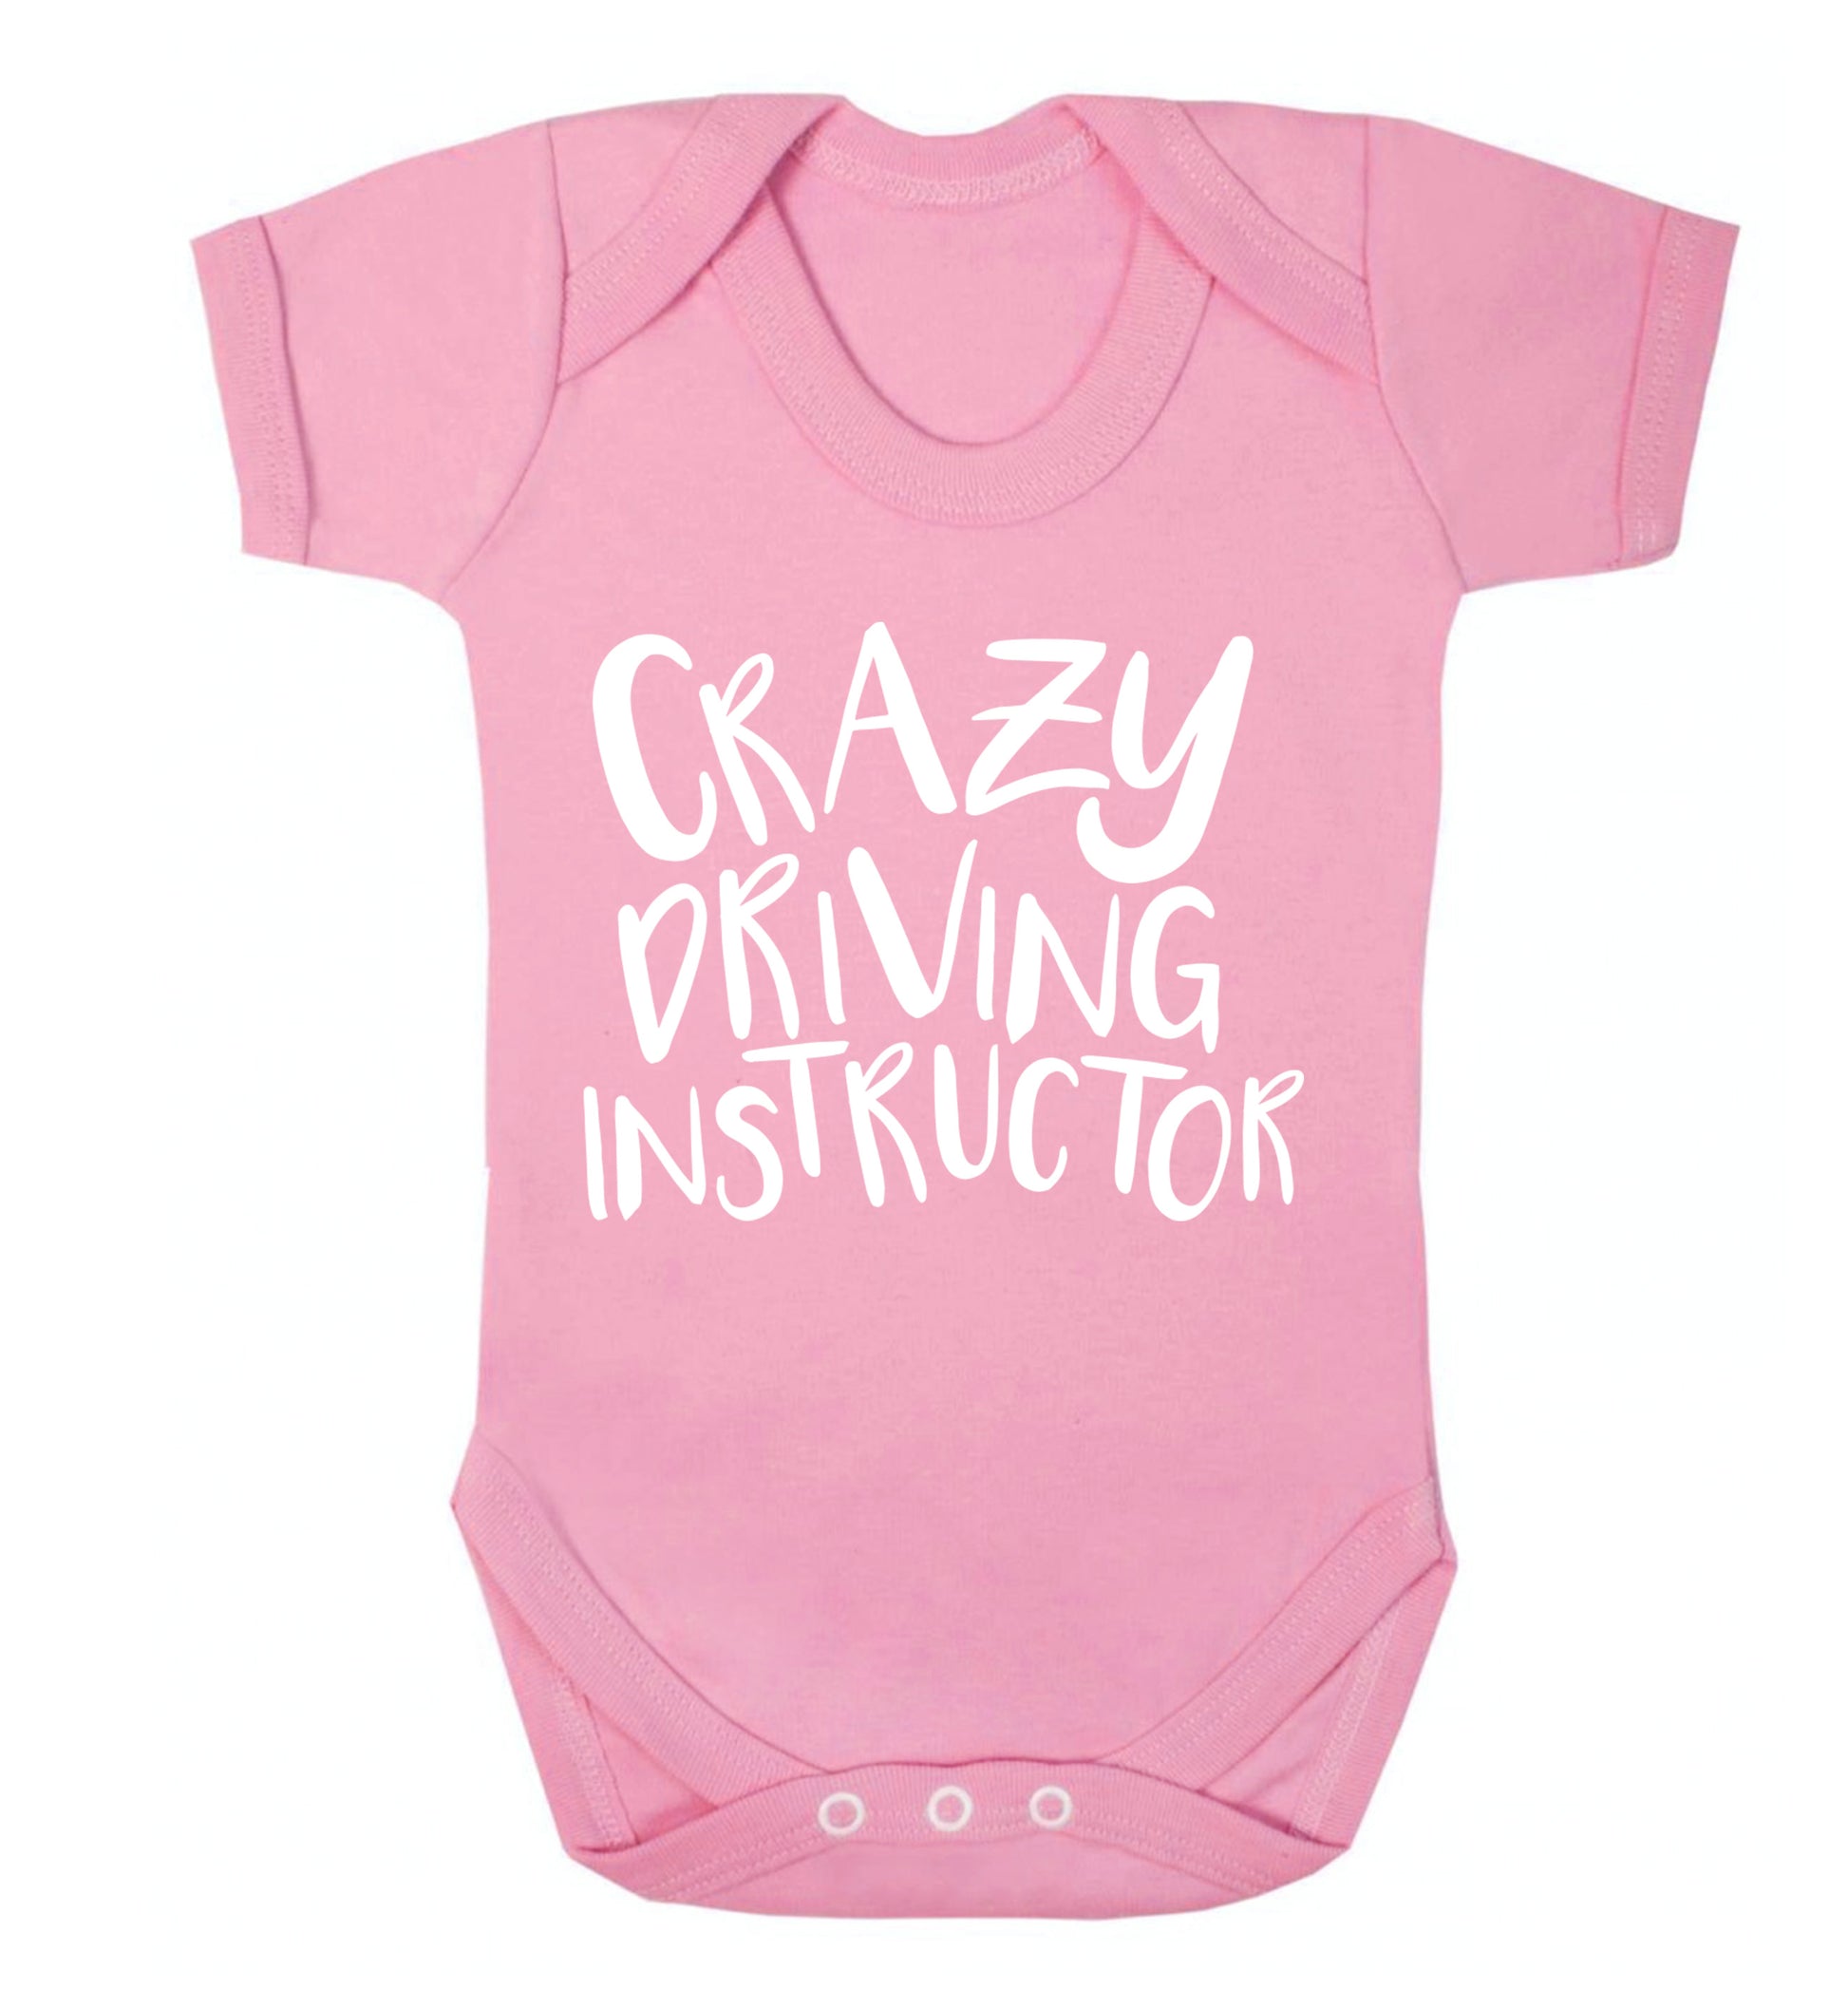 Crazy driving instructor Baby Vest pale pink 18-24 months